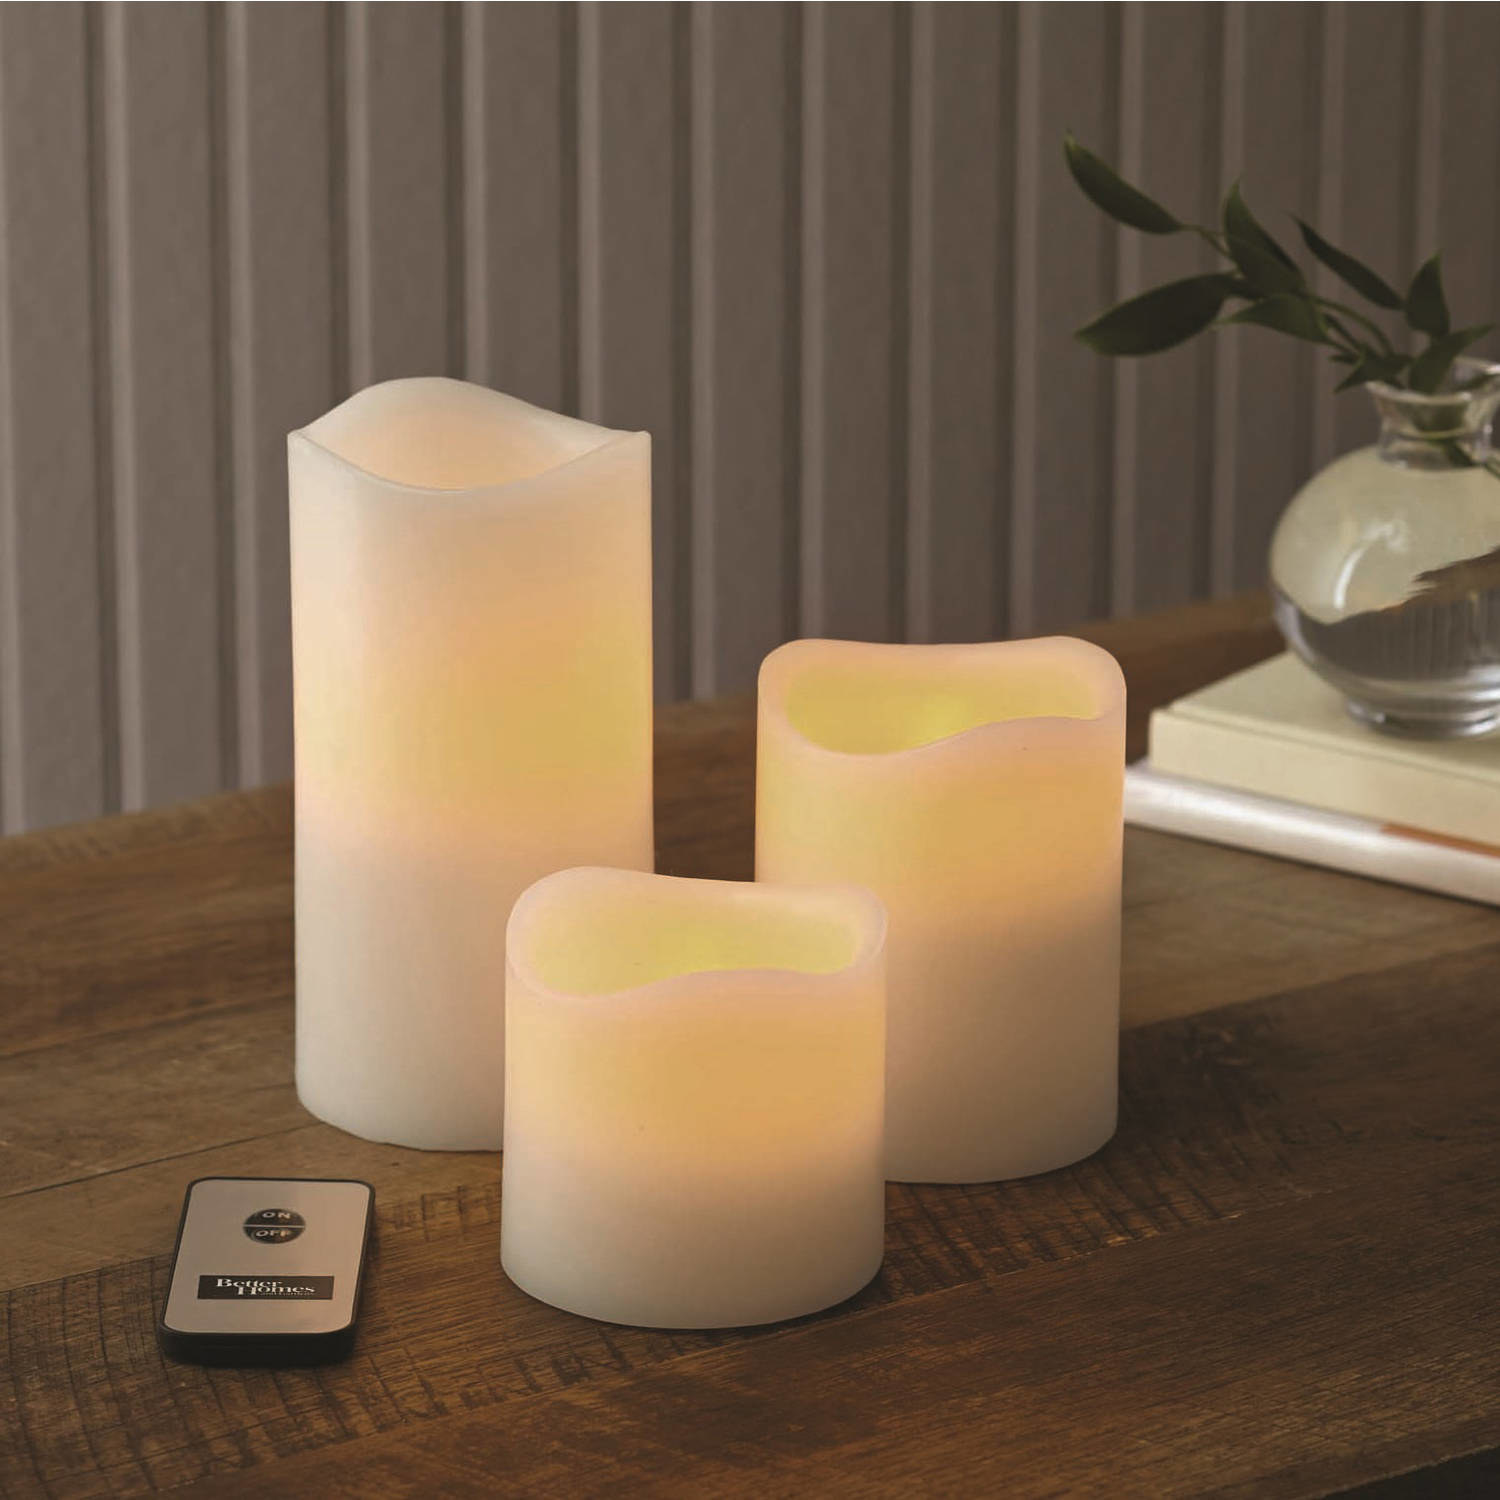 a set of three off white fake candles with a soft glow and a remote